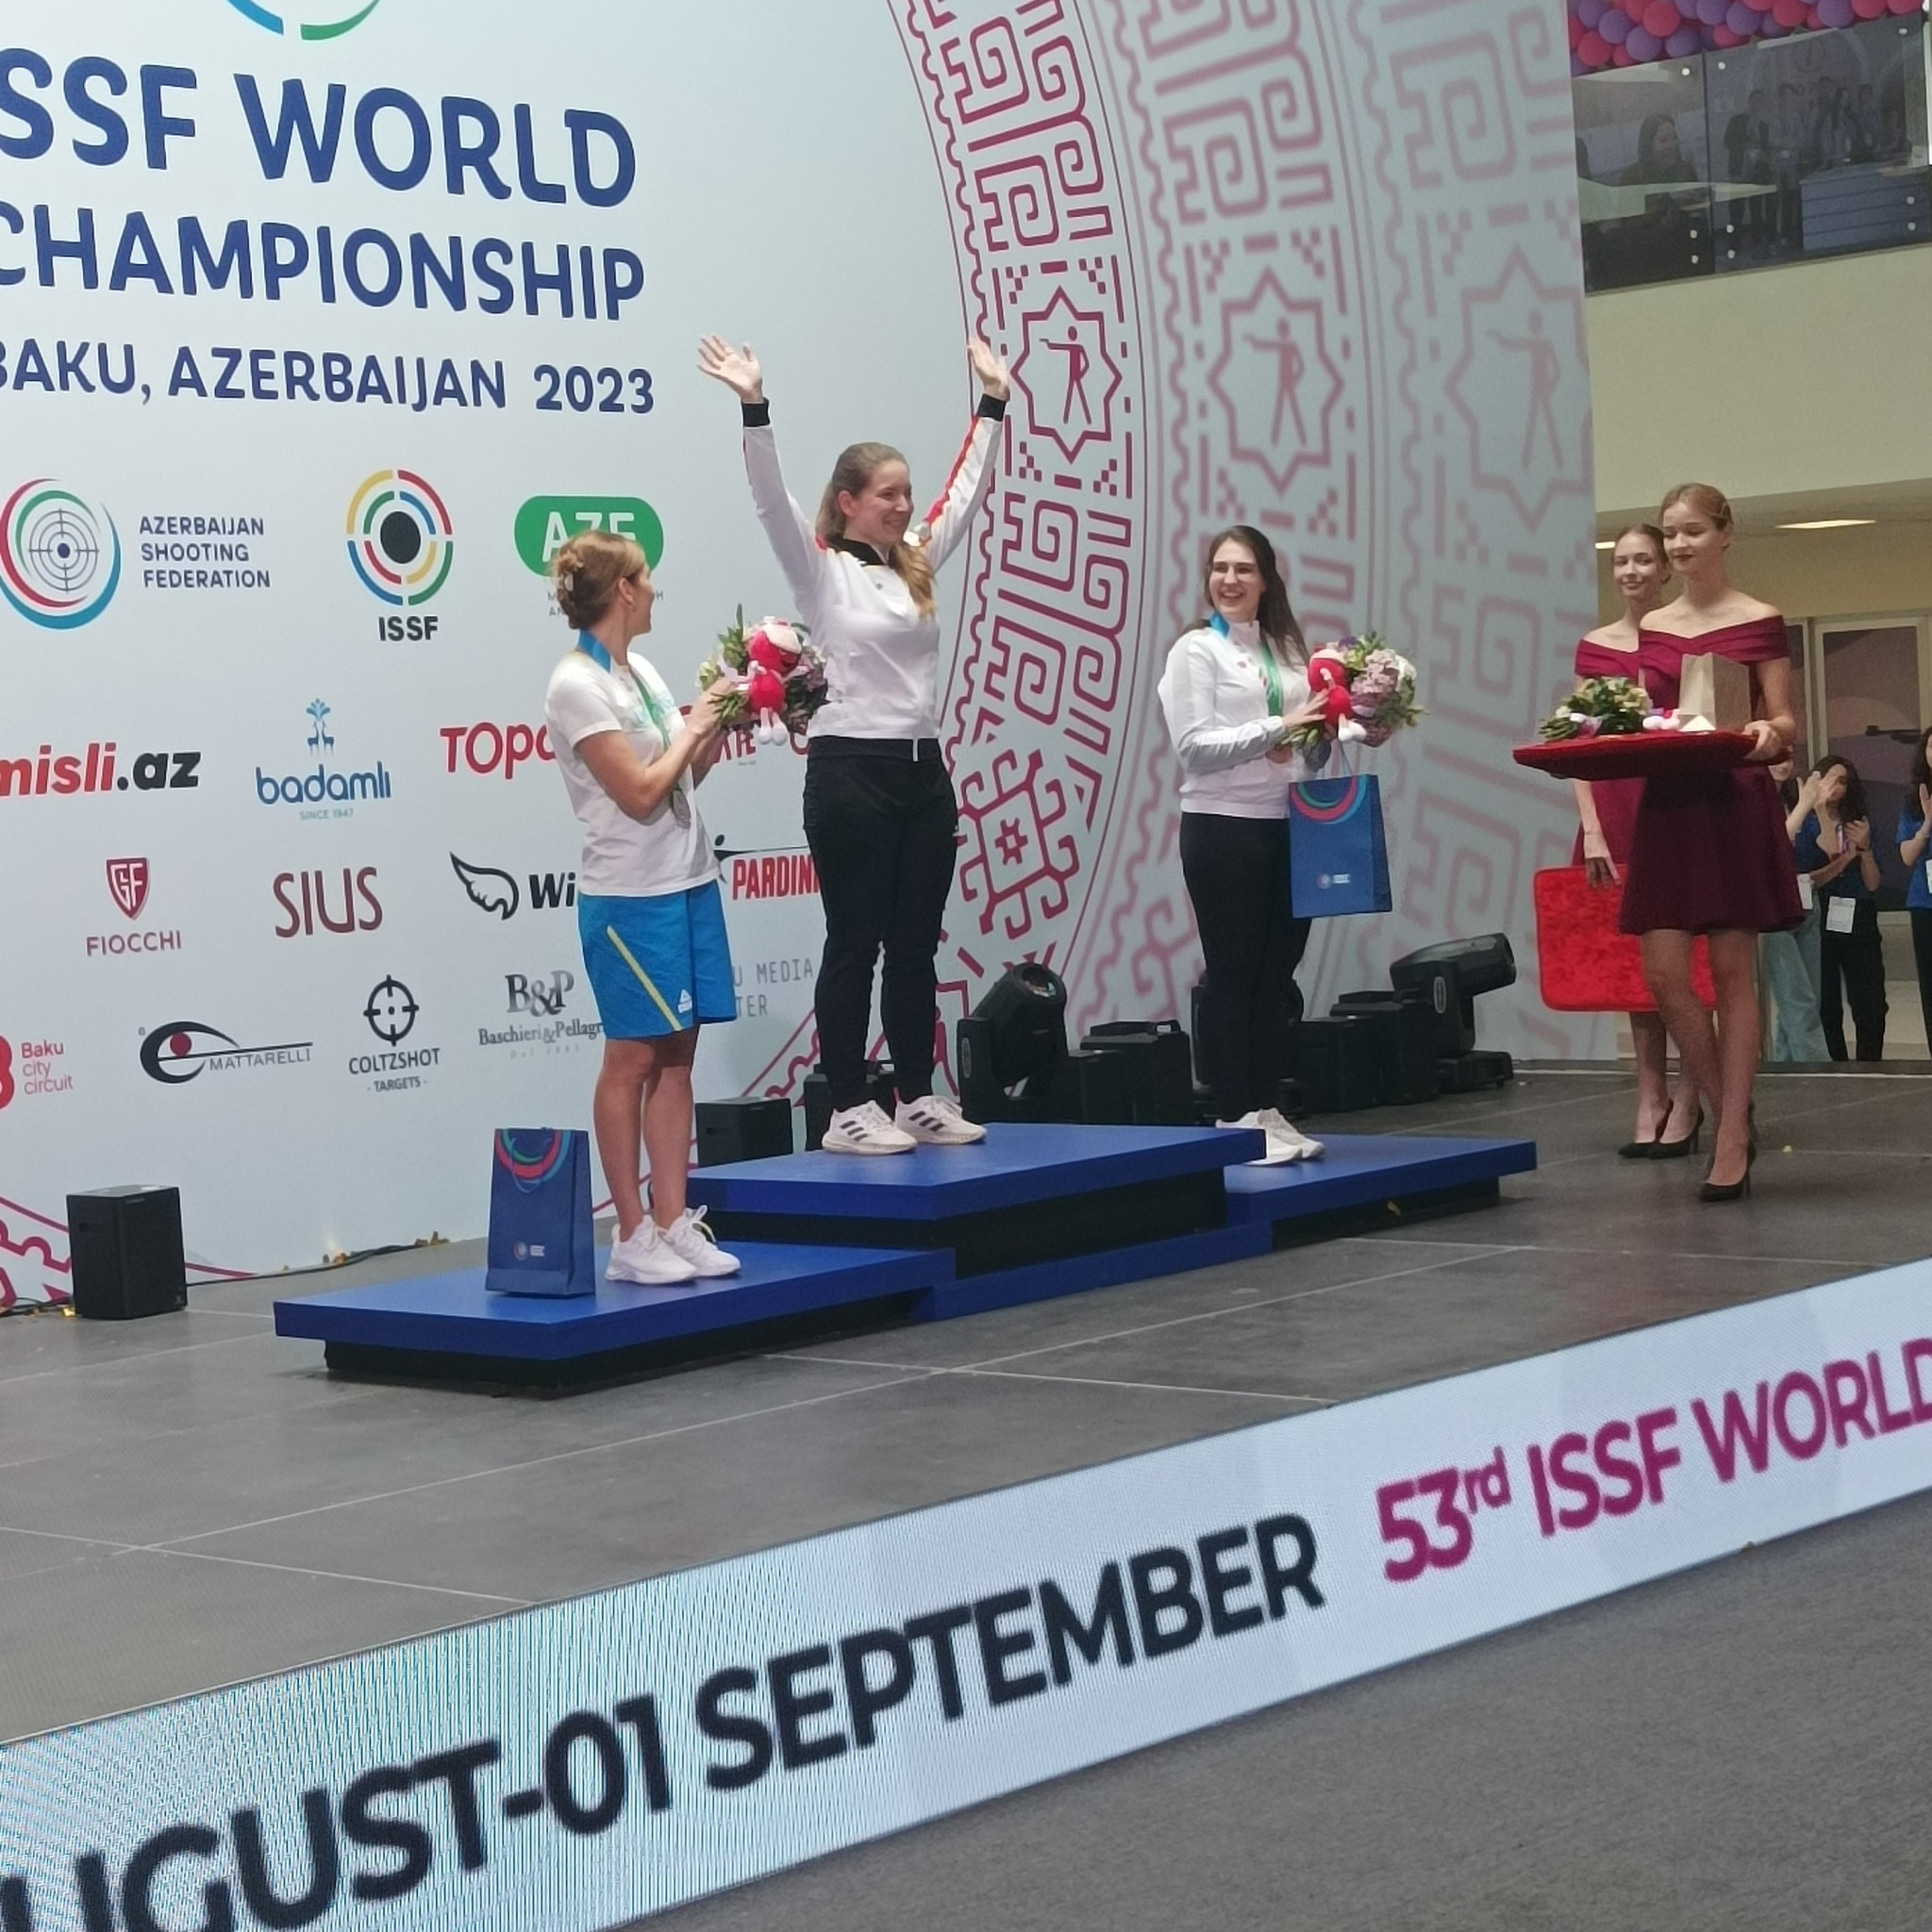 World number one Vennekamp dominates pistol and Schmirl wins three position rifle at ISSF World Championships